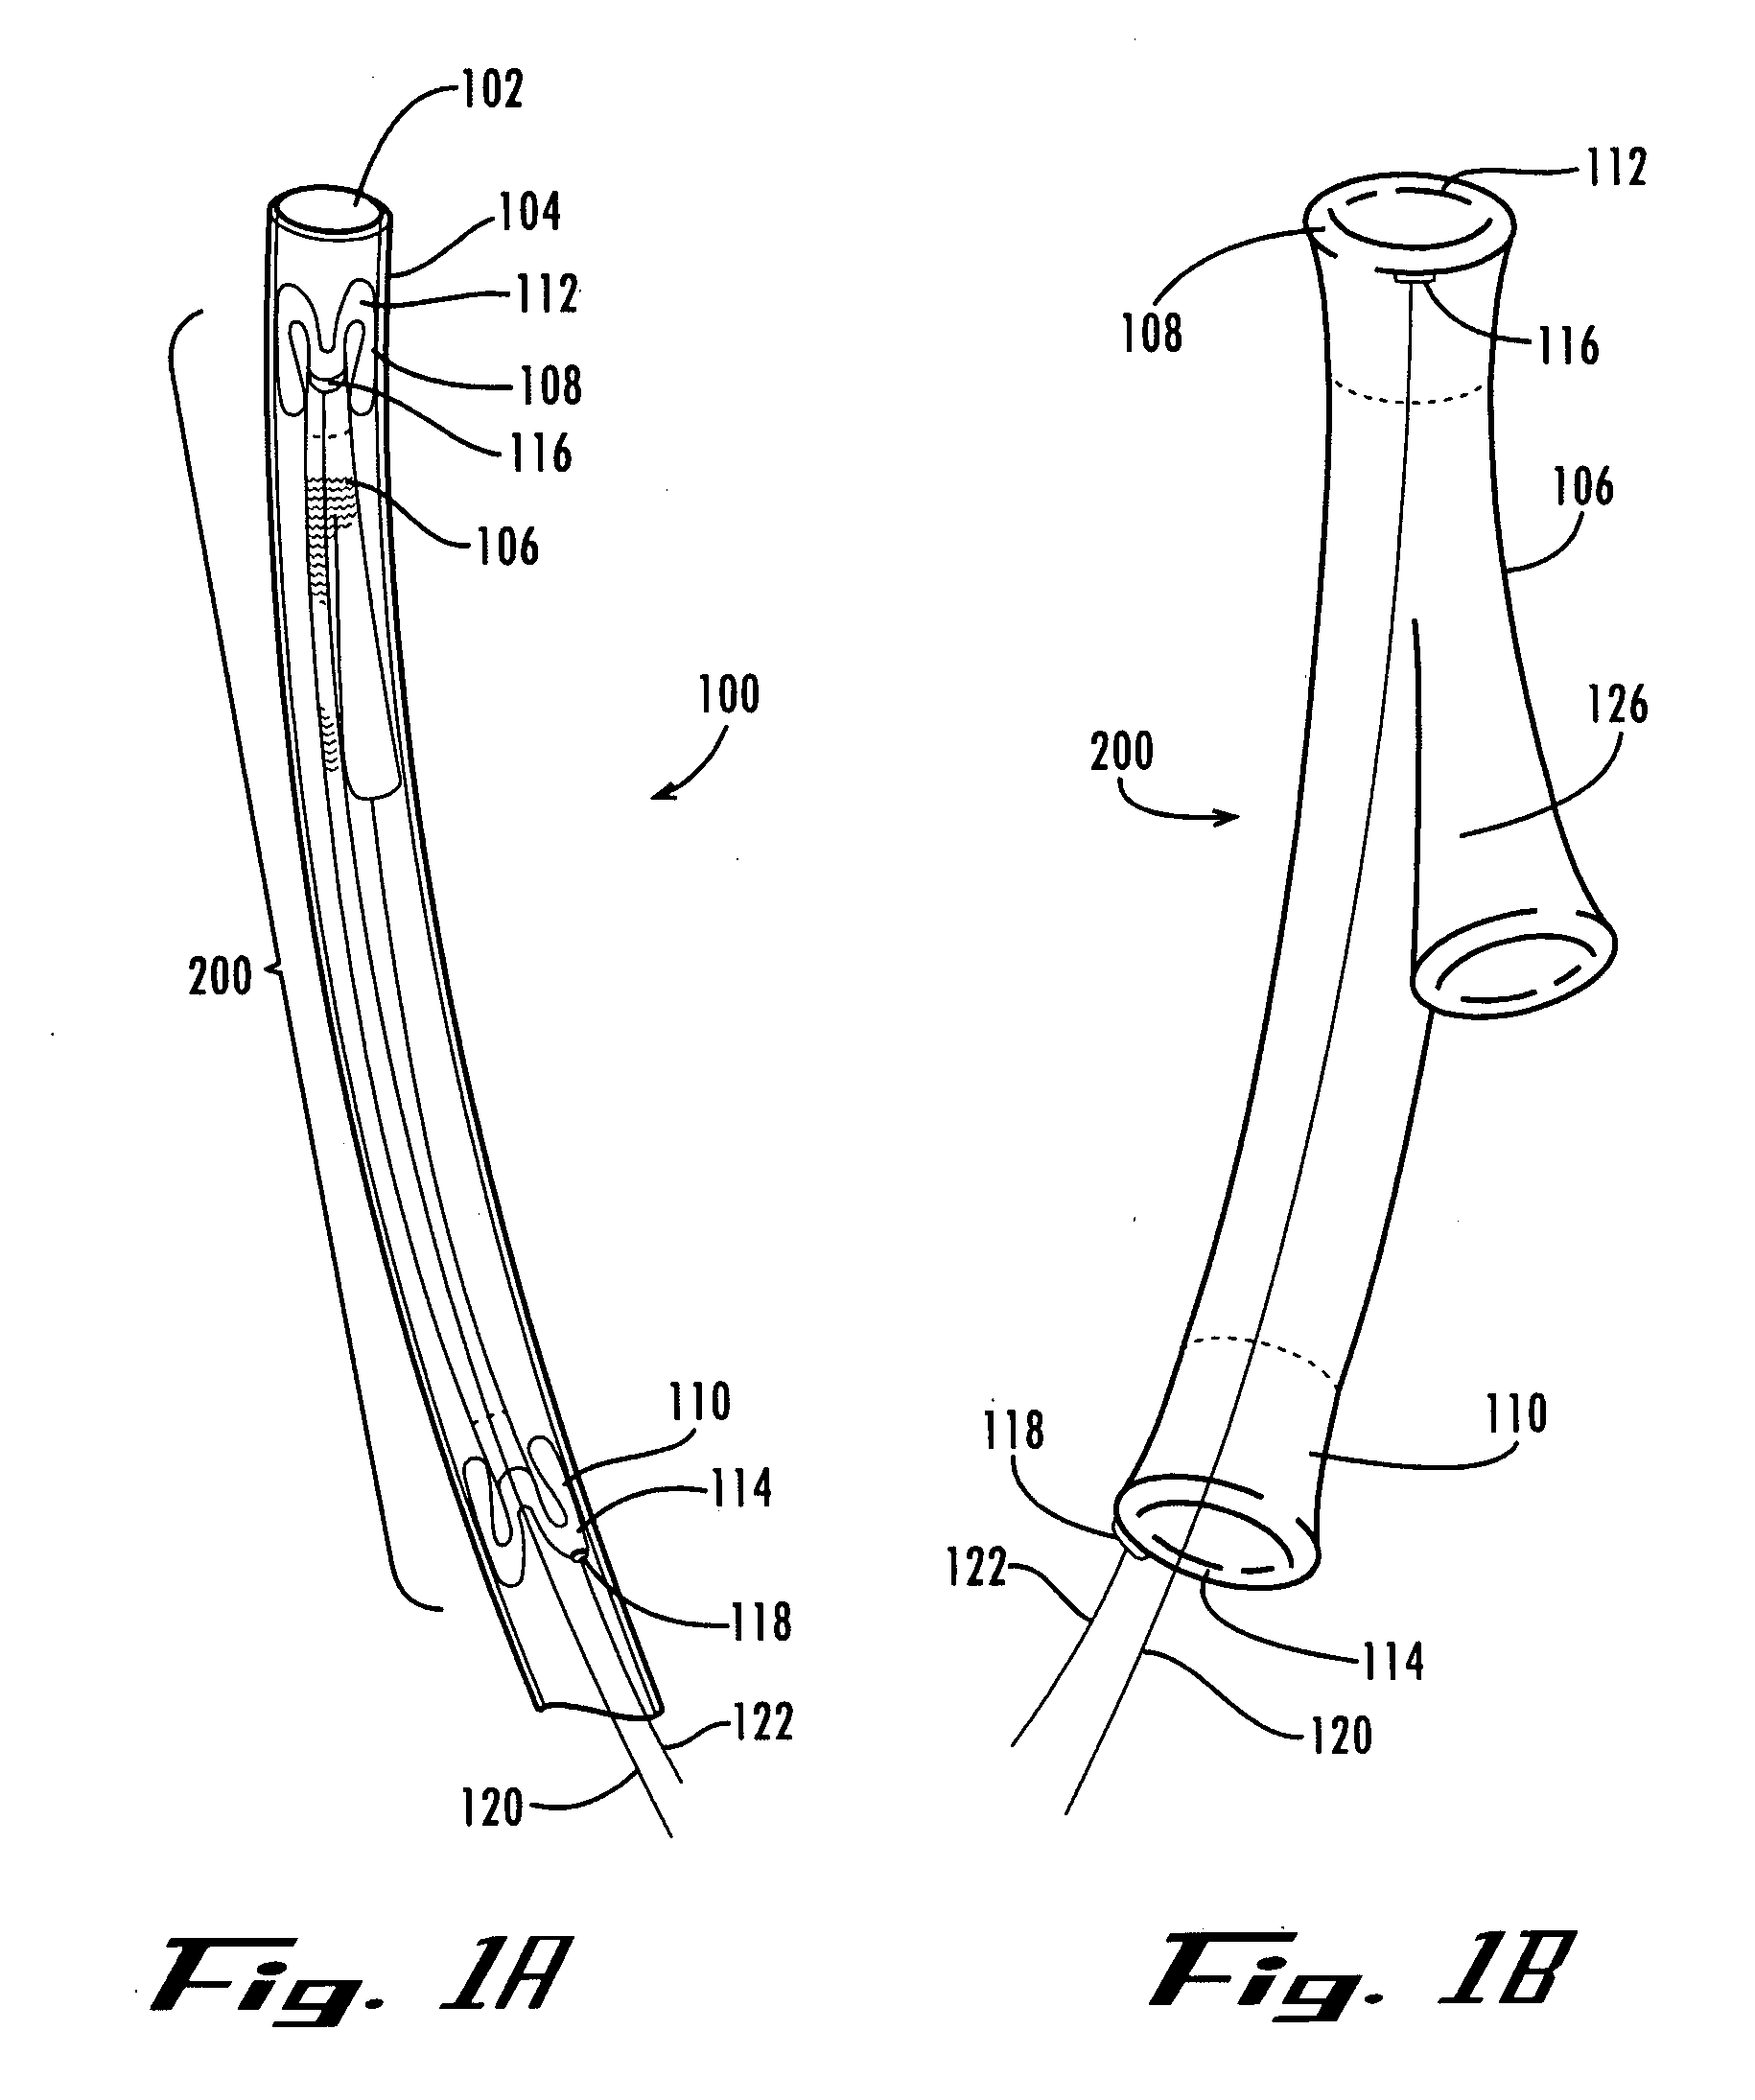 Sealable endovascular implants and methods for their use